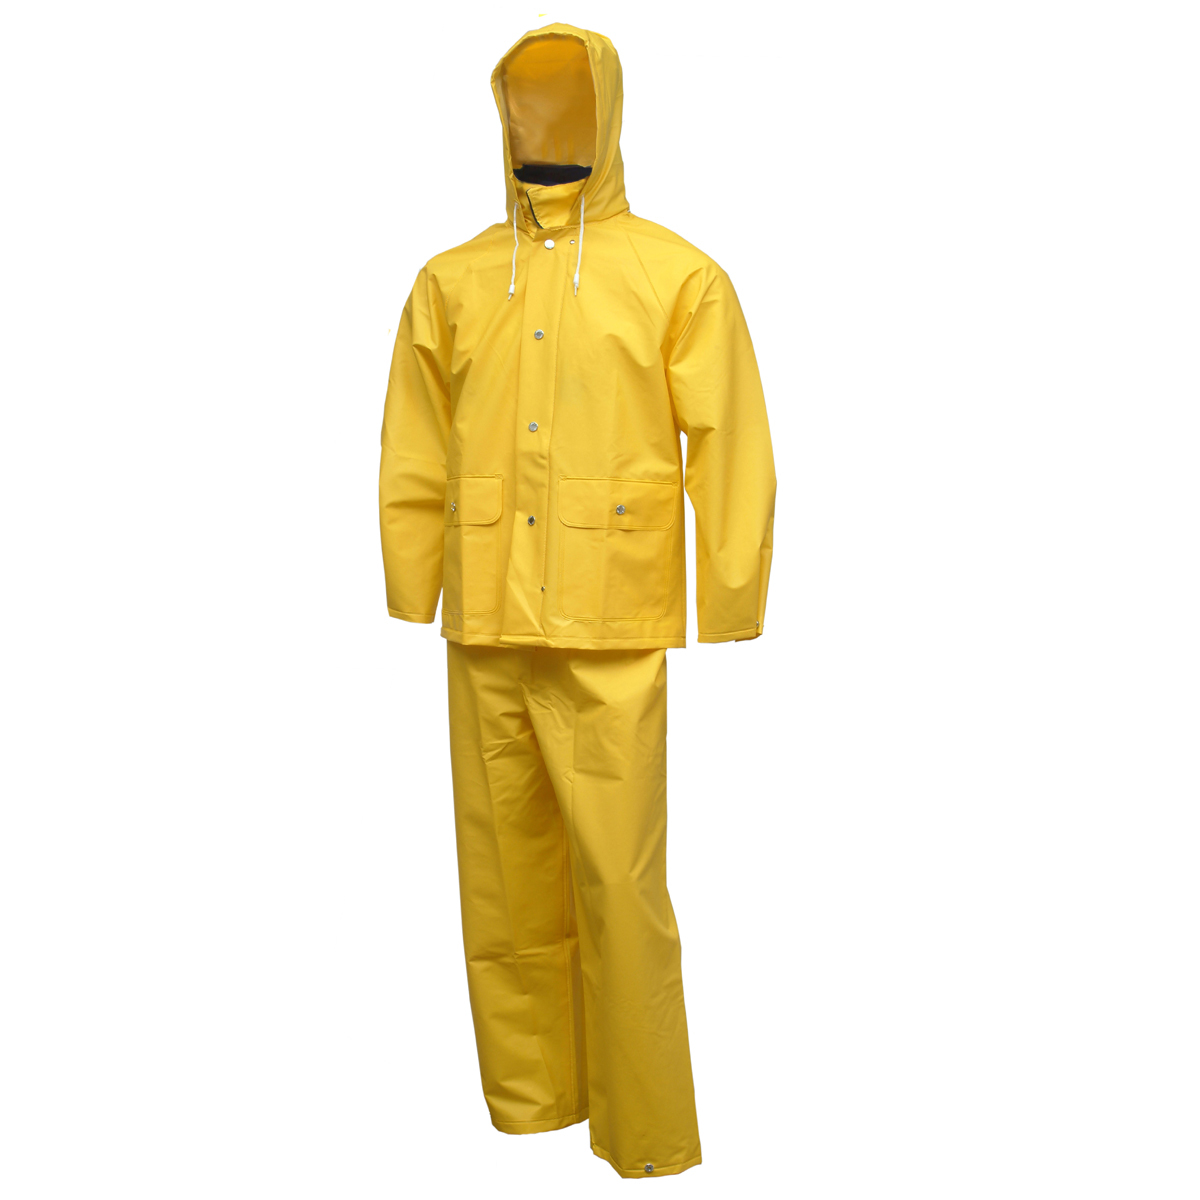 Tingley Medium Yellow Industrial Work .35 mm PVC And Polyester 3-Piece Rain Suit With Jacket, Hood And Overalls